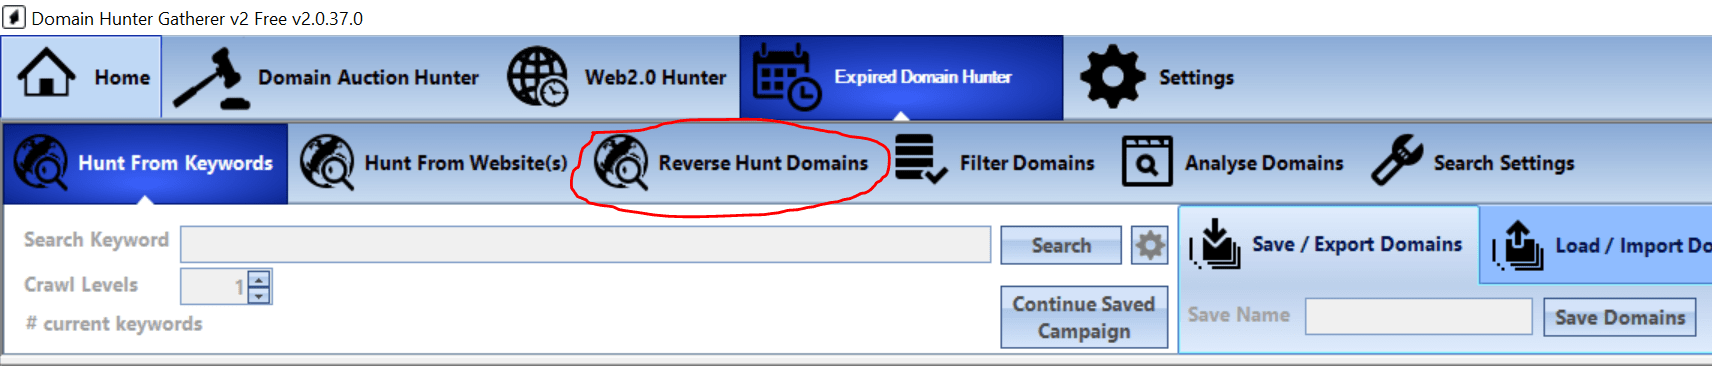 Reverse hunting domains